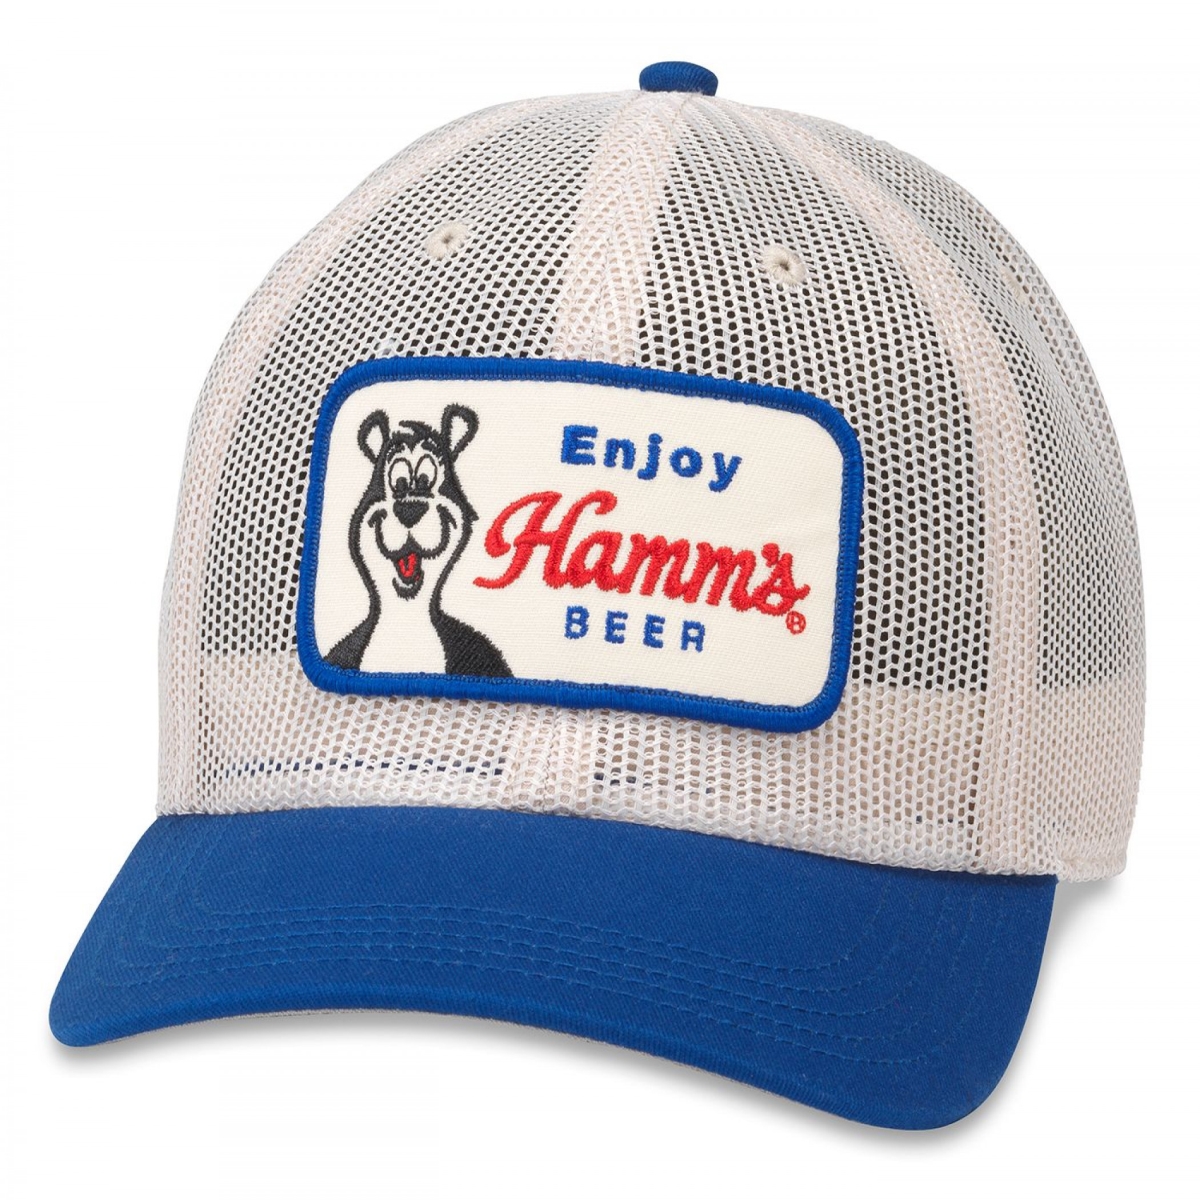 Picture of American Needle 816774 Hamms Beer Enjoy Tucker Style Hat